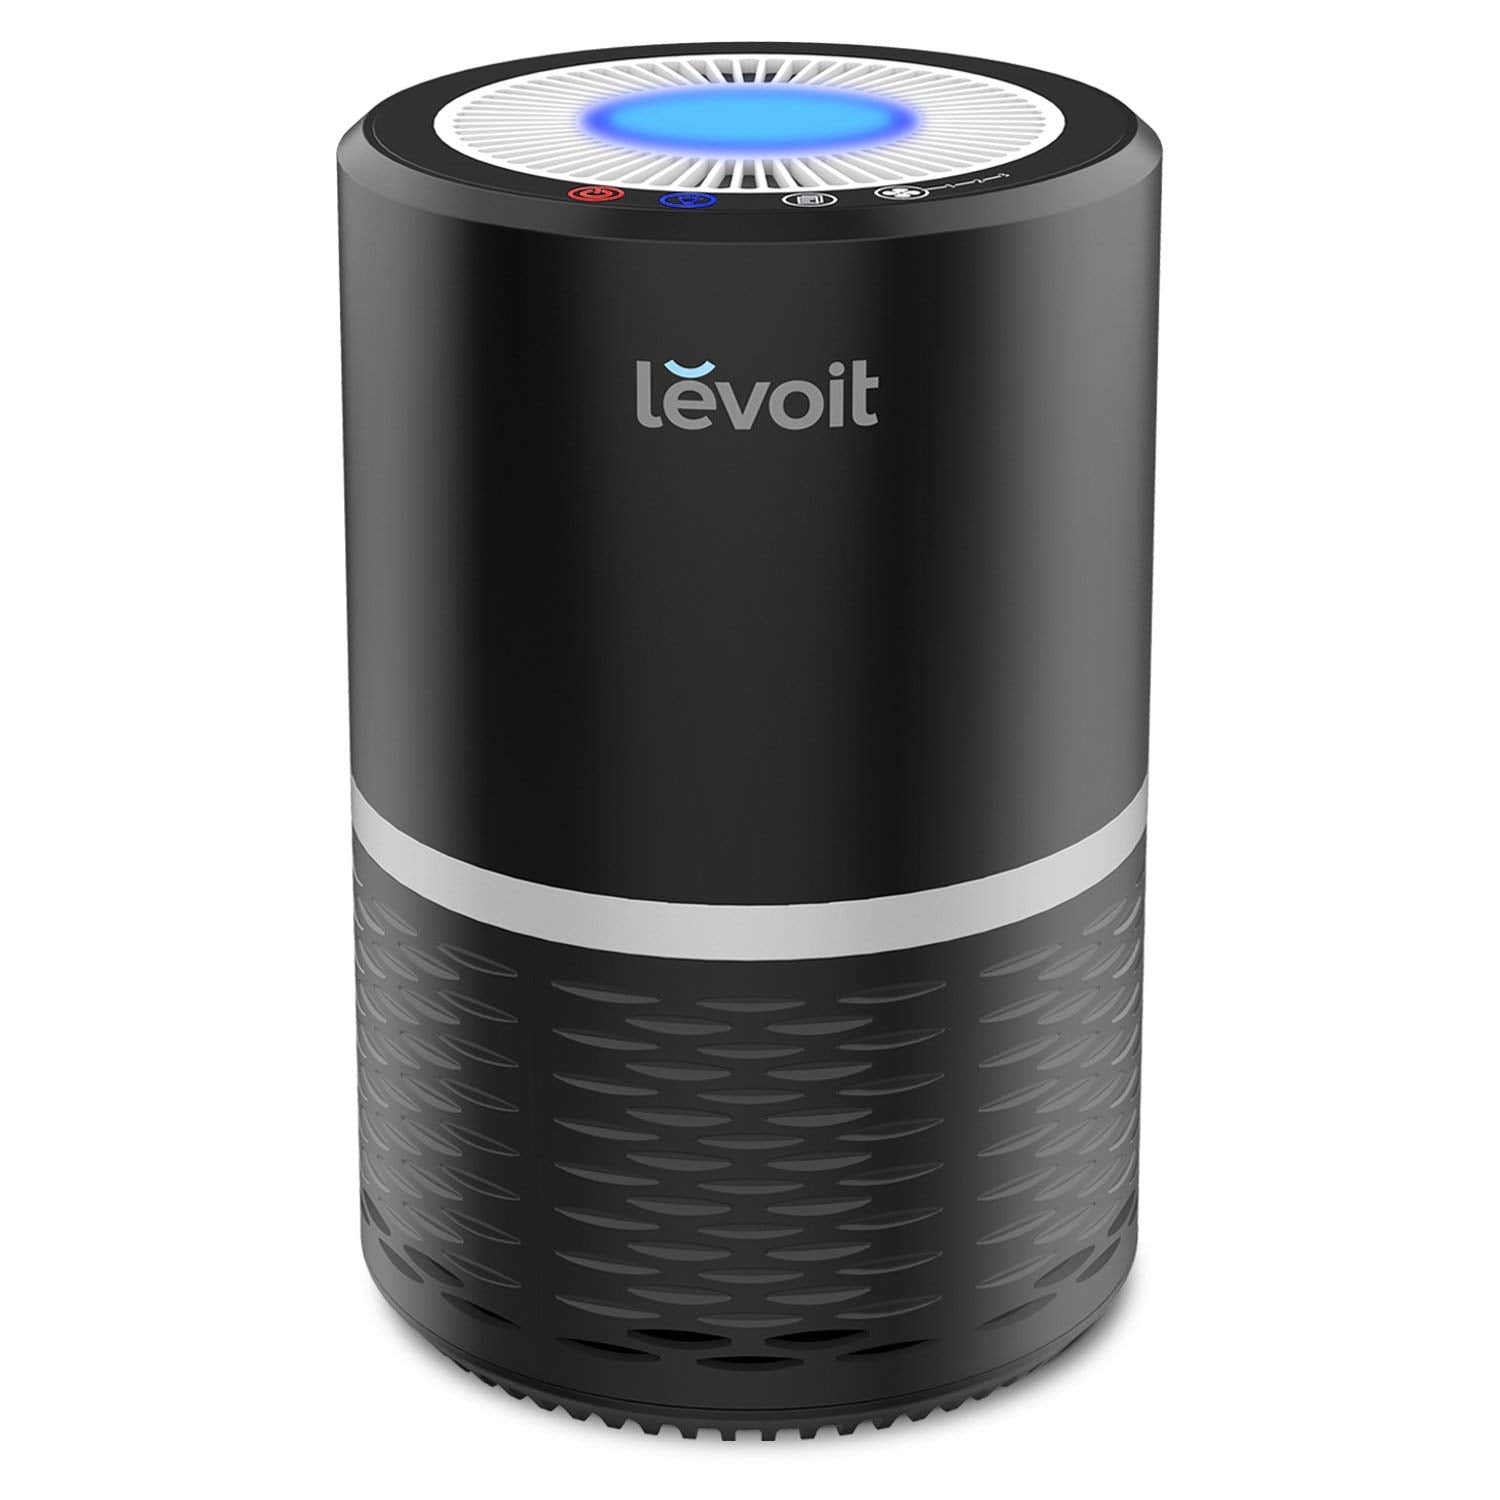 Levoit Air Purifier LV-H132-WM, HEPA Upgraded Filter for Smoke, Odors, Pet, Walmart Exclusive